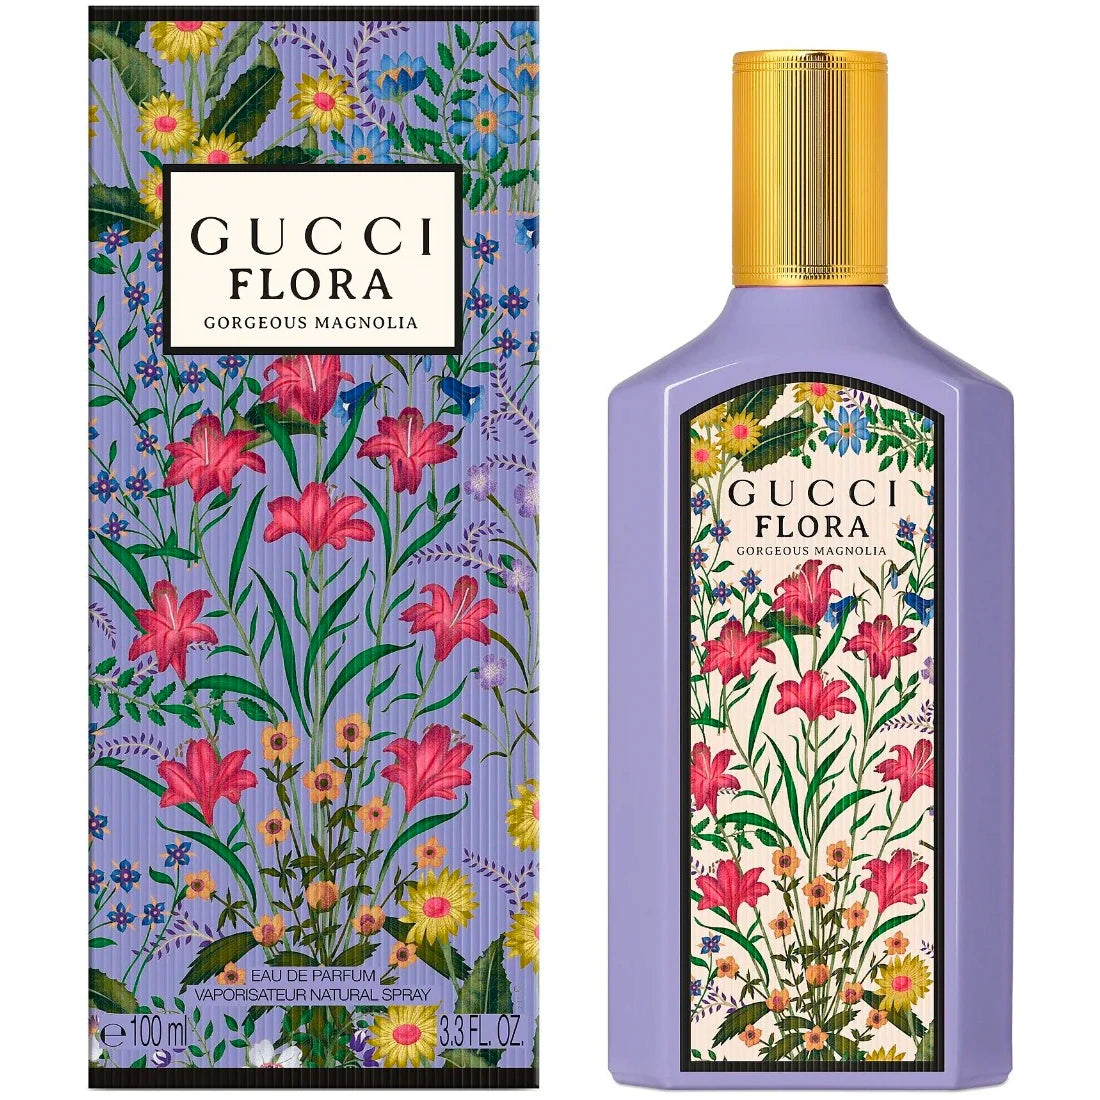 <p>Embark on a journey of freedom and discovery with Flora Gorgeous Magnolia. Housed in a vibrant purple lacquered bottle adorned with blooms from Gucci's iconic flora pattern, this captivating 3.3 oz EDP will take your senses on a journey. Crafted with dewberries accord, magnolia accord, and patchoulie, it will evoke luminous fantasies with confidence. </p>